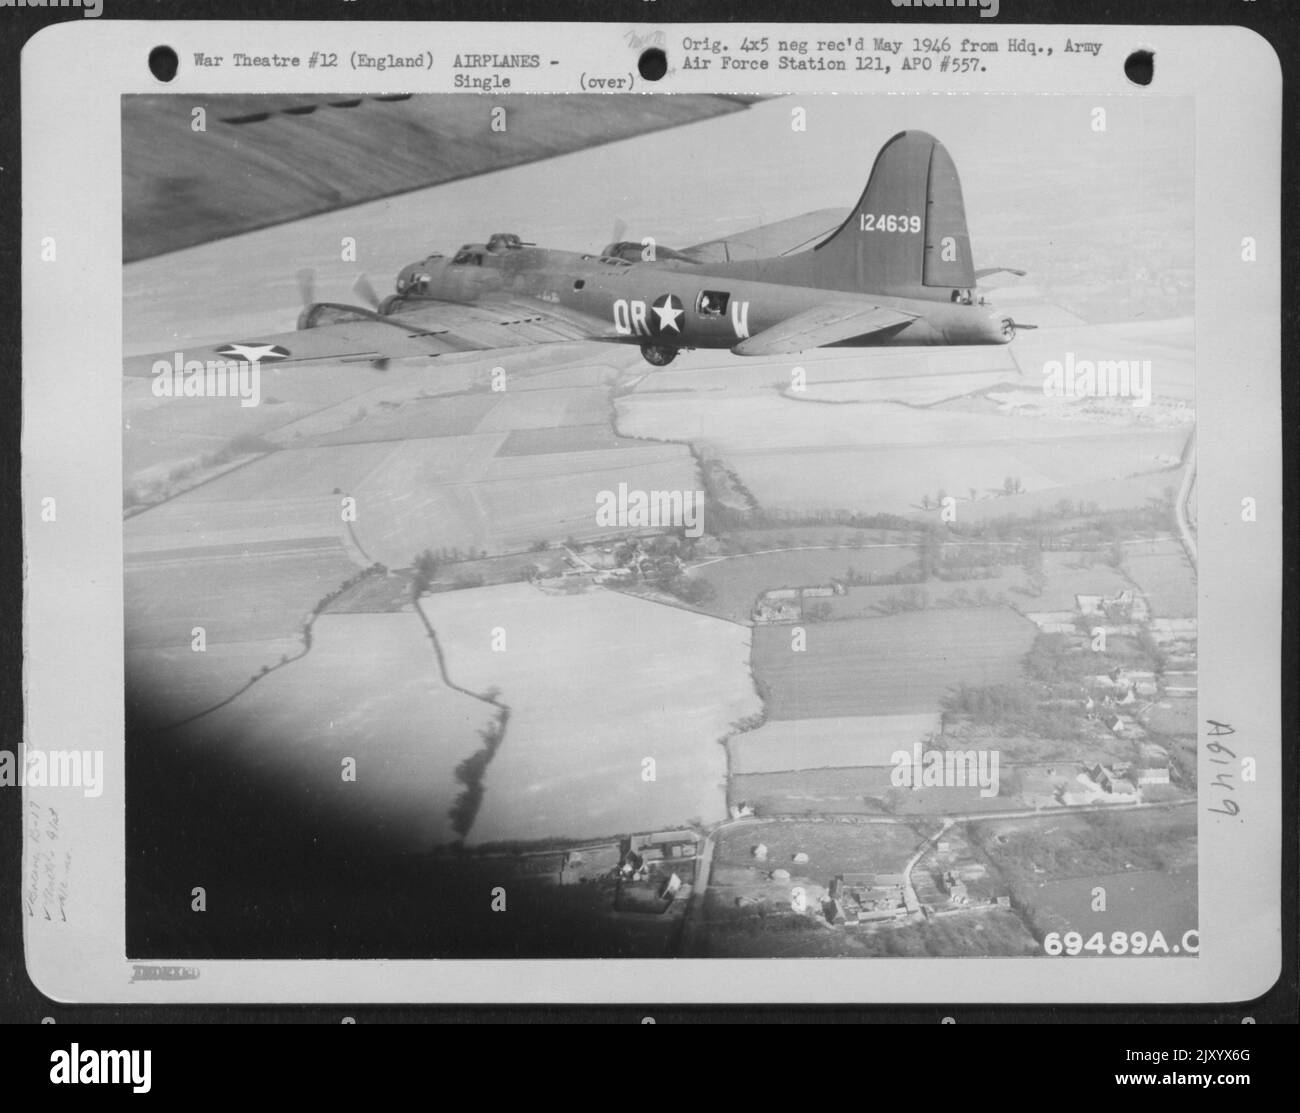 A Boeing B-17 'Flying Fortress' (A/C No. 124639), Of The 91St Bomb Group Drones Over The English Countryside On A Practice Mission. 14 June 1943. Stock Photo